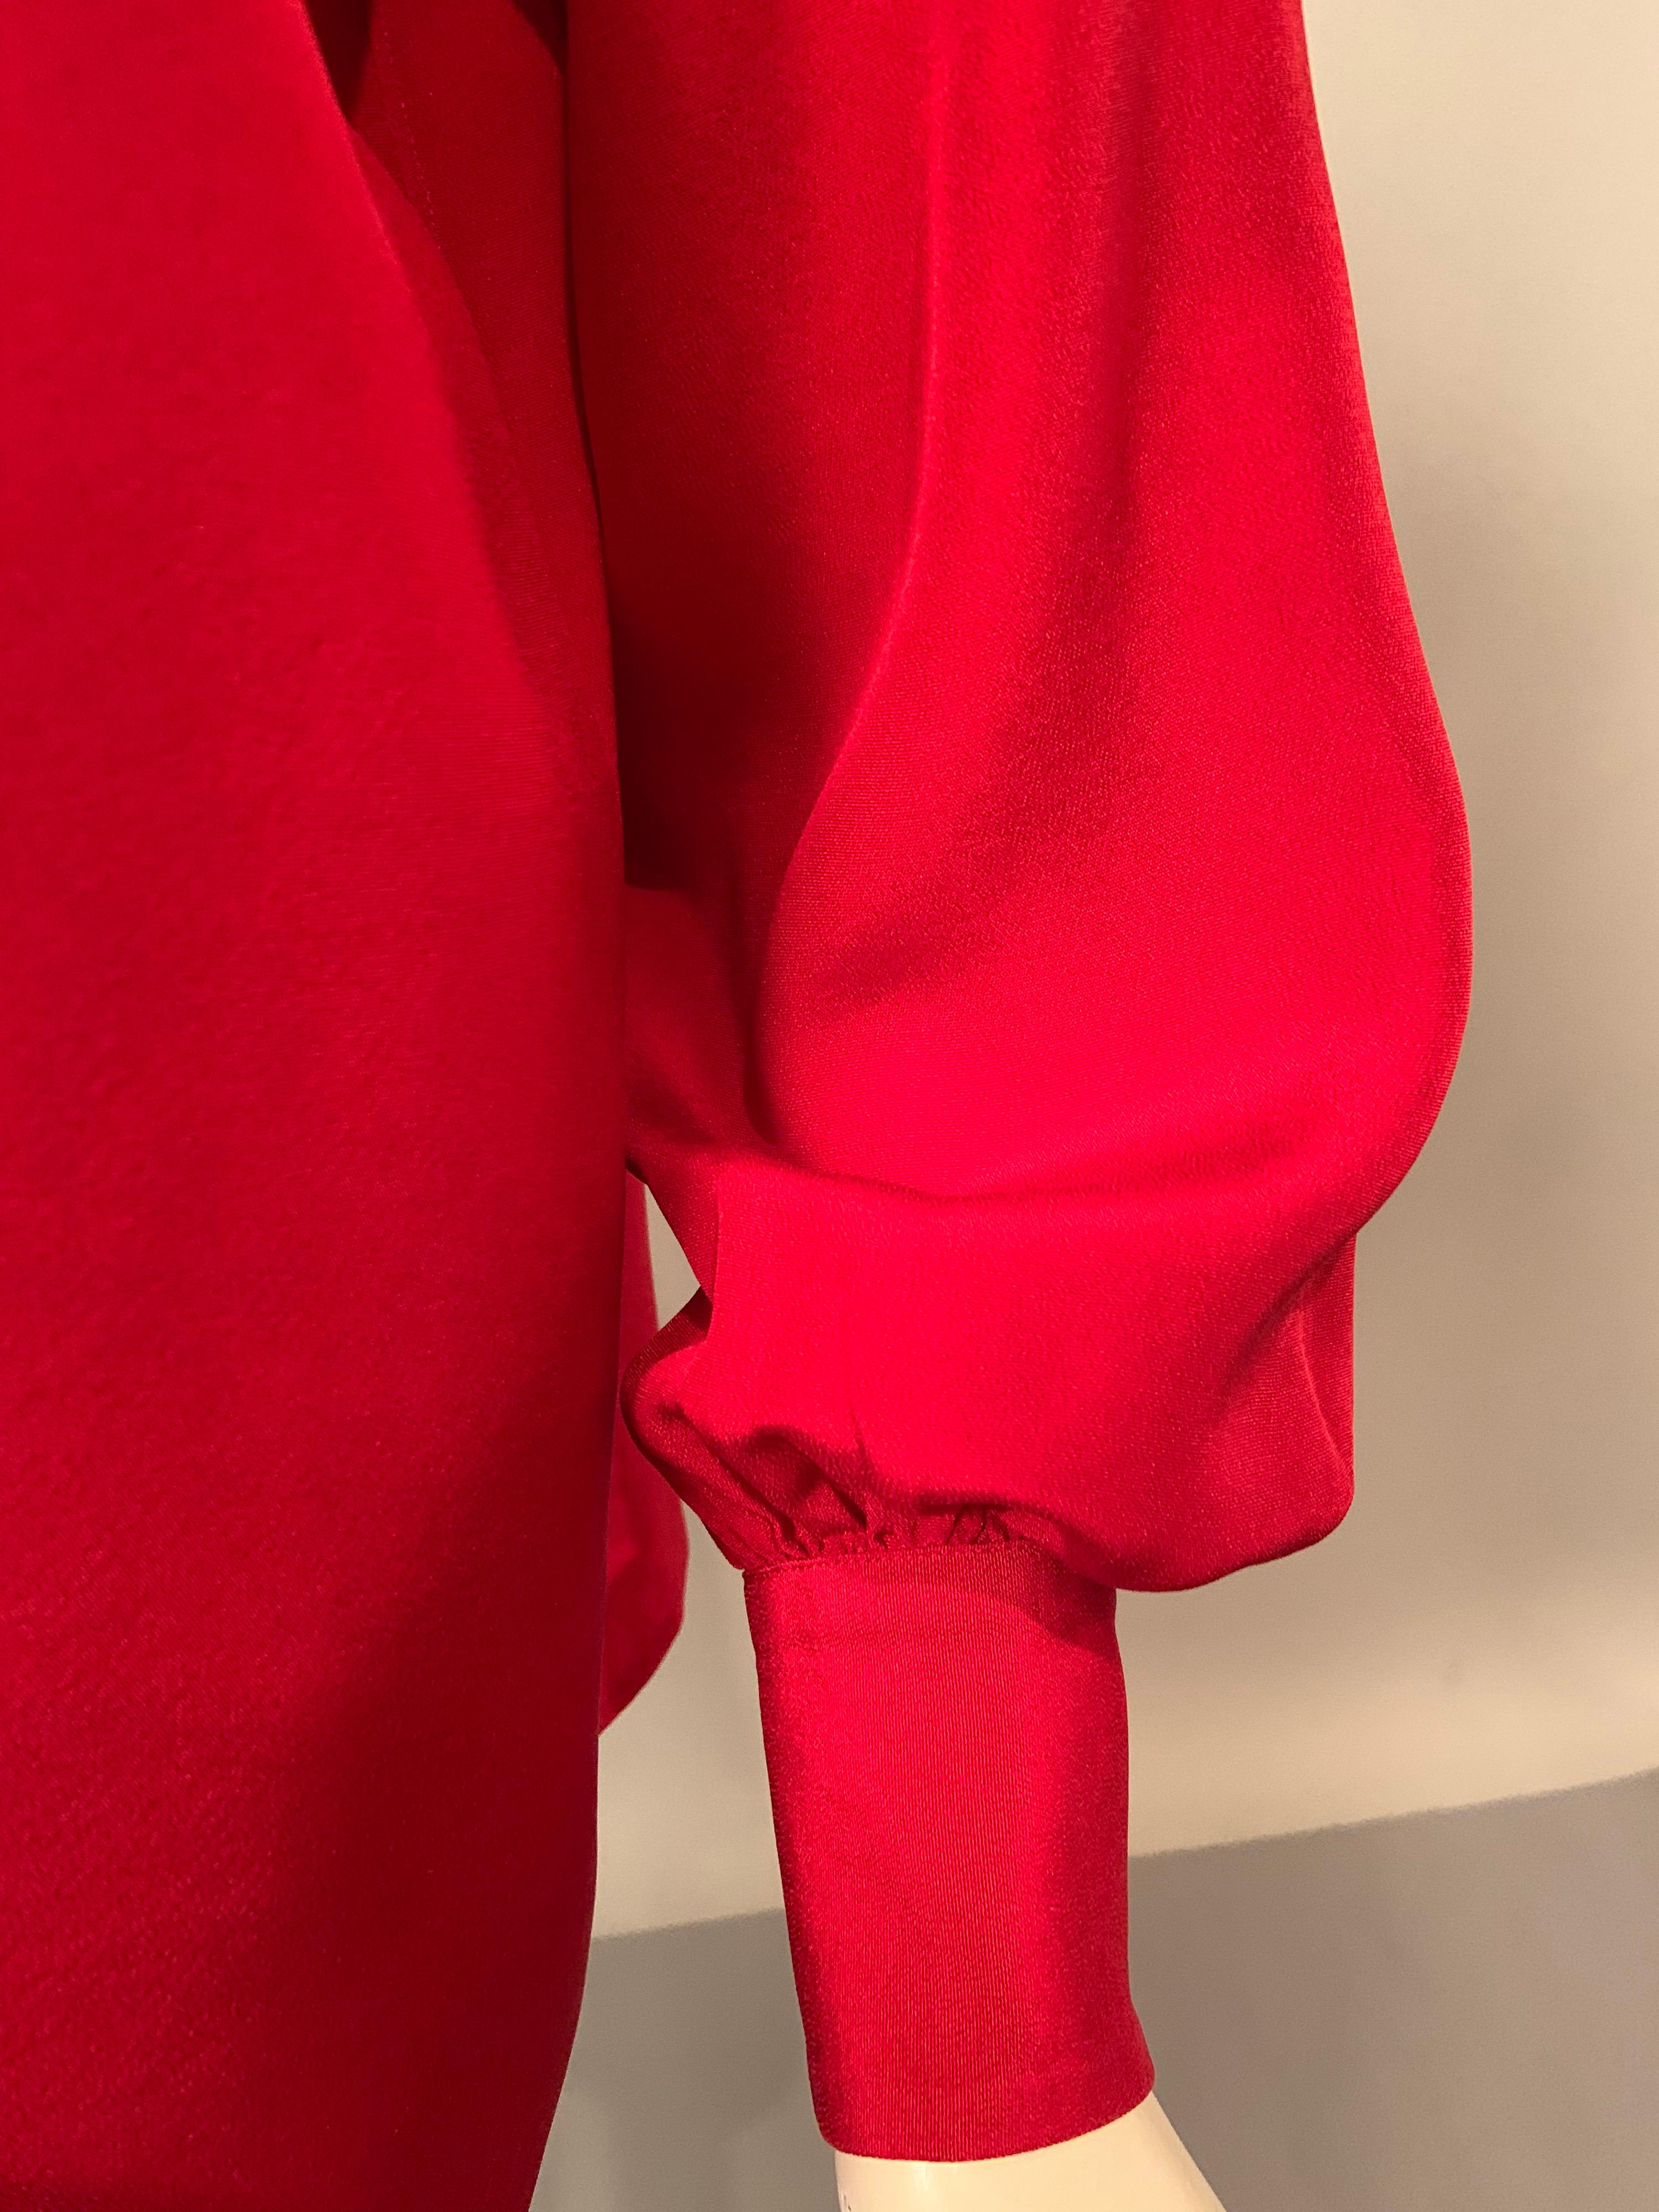 Yves Saint Laurent Red Silk Blouse with Scarf Tie Neckline In Excellent Condition For Sale In New Hope, PA